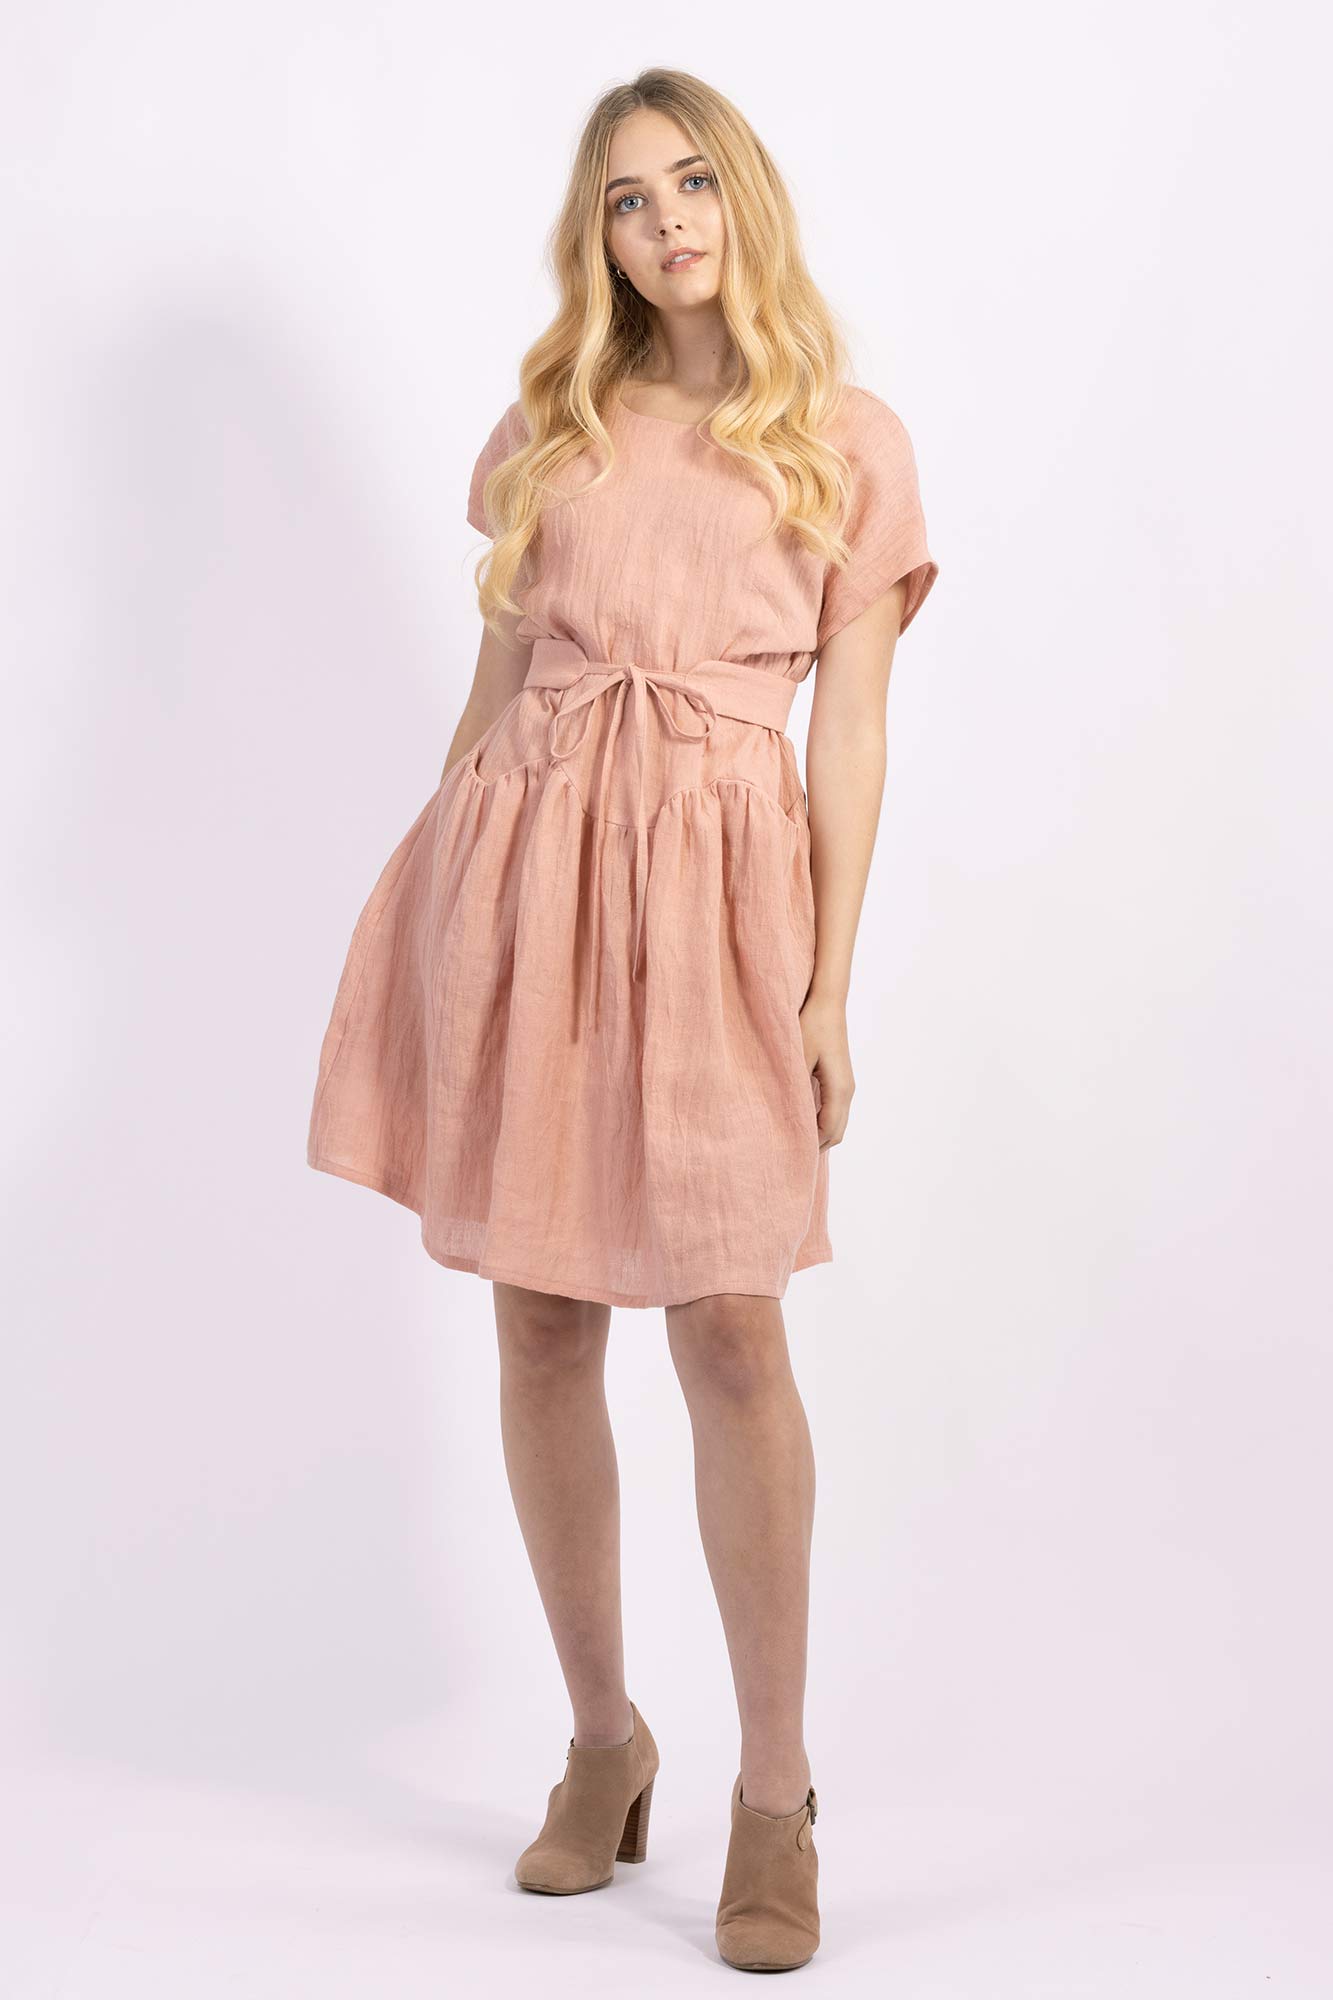 Forget-me-not April A-line dress and Gemma tie belt in apricot crinkle linen, front view